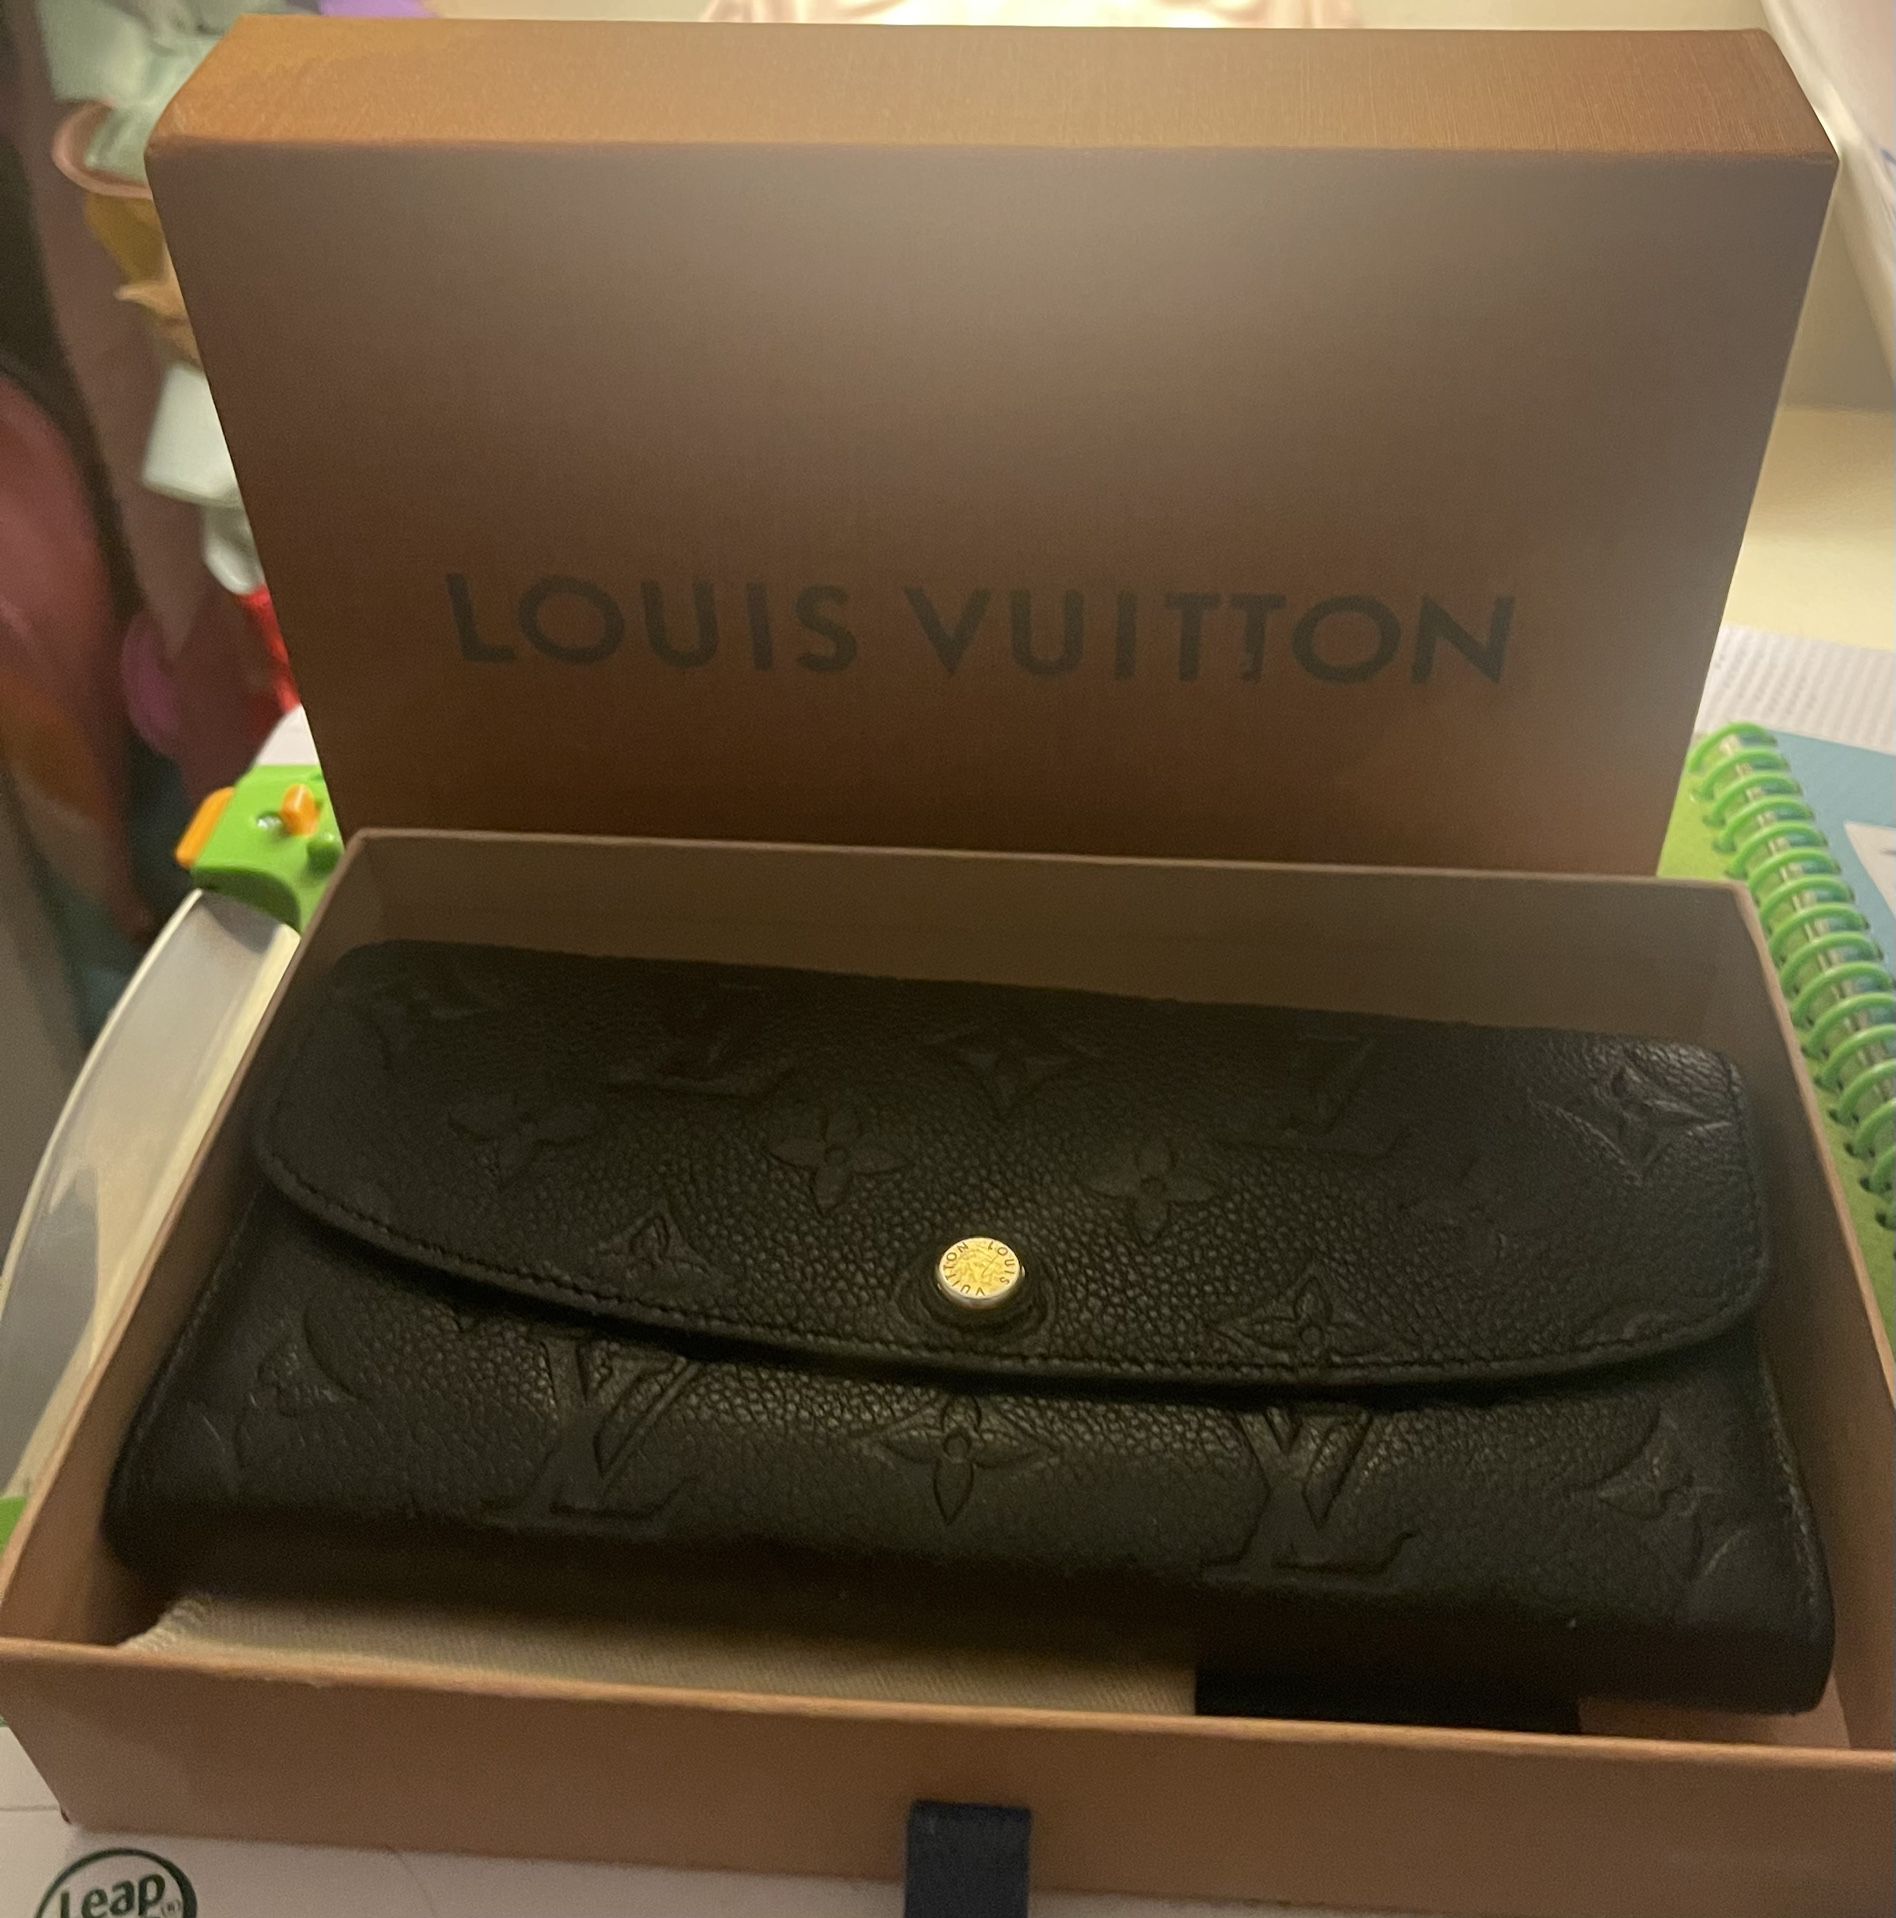 Authentic Louis Vuitton Emilie Wallet for Sale in Bothell, WA - OfferUp